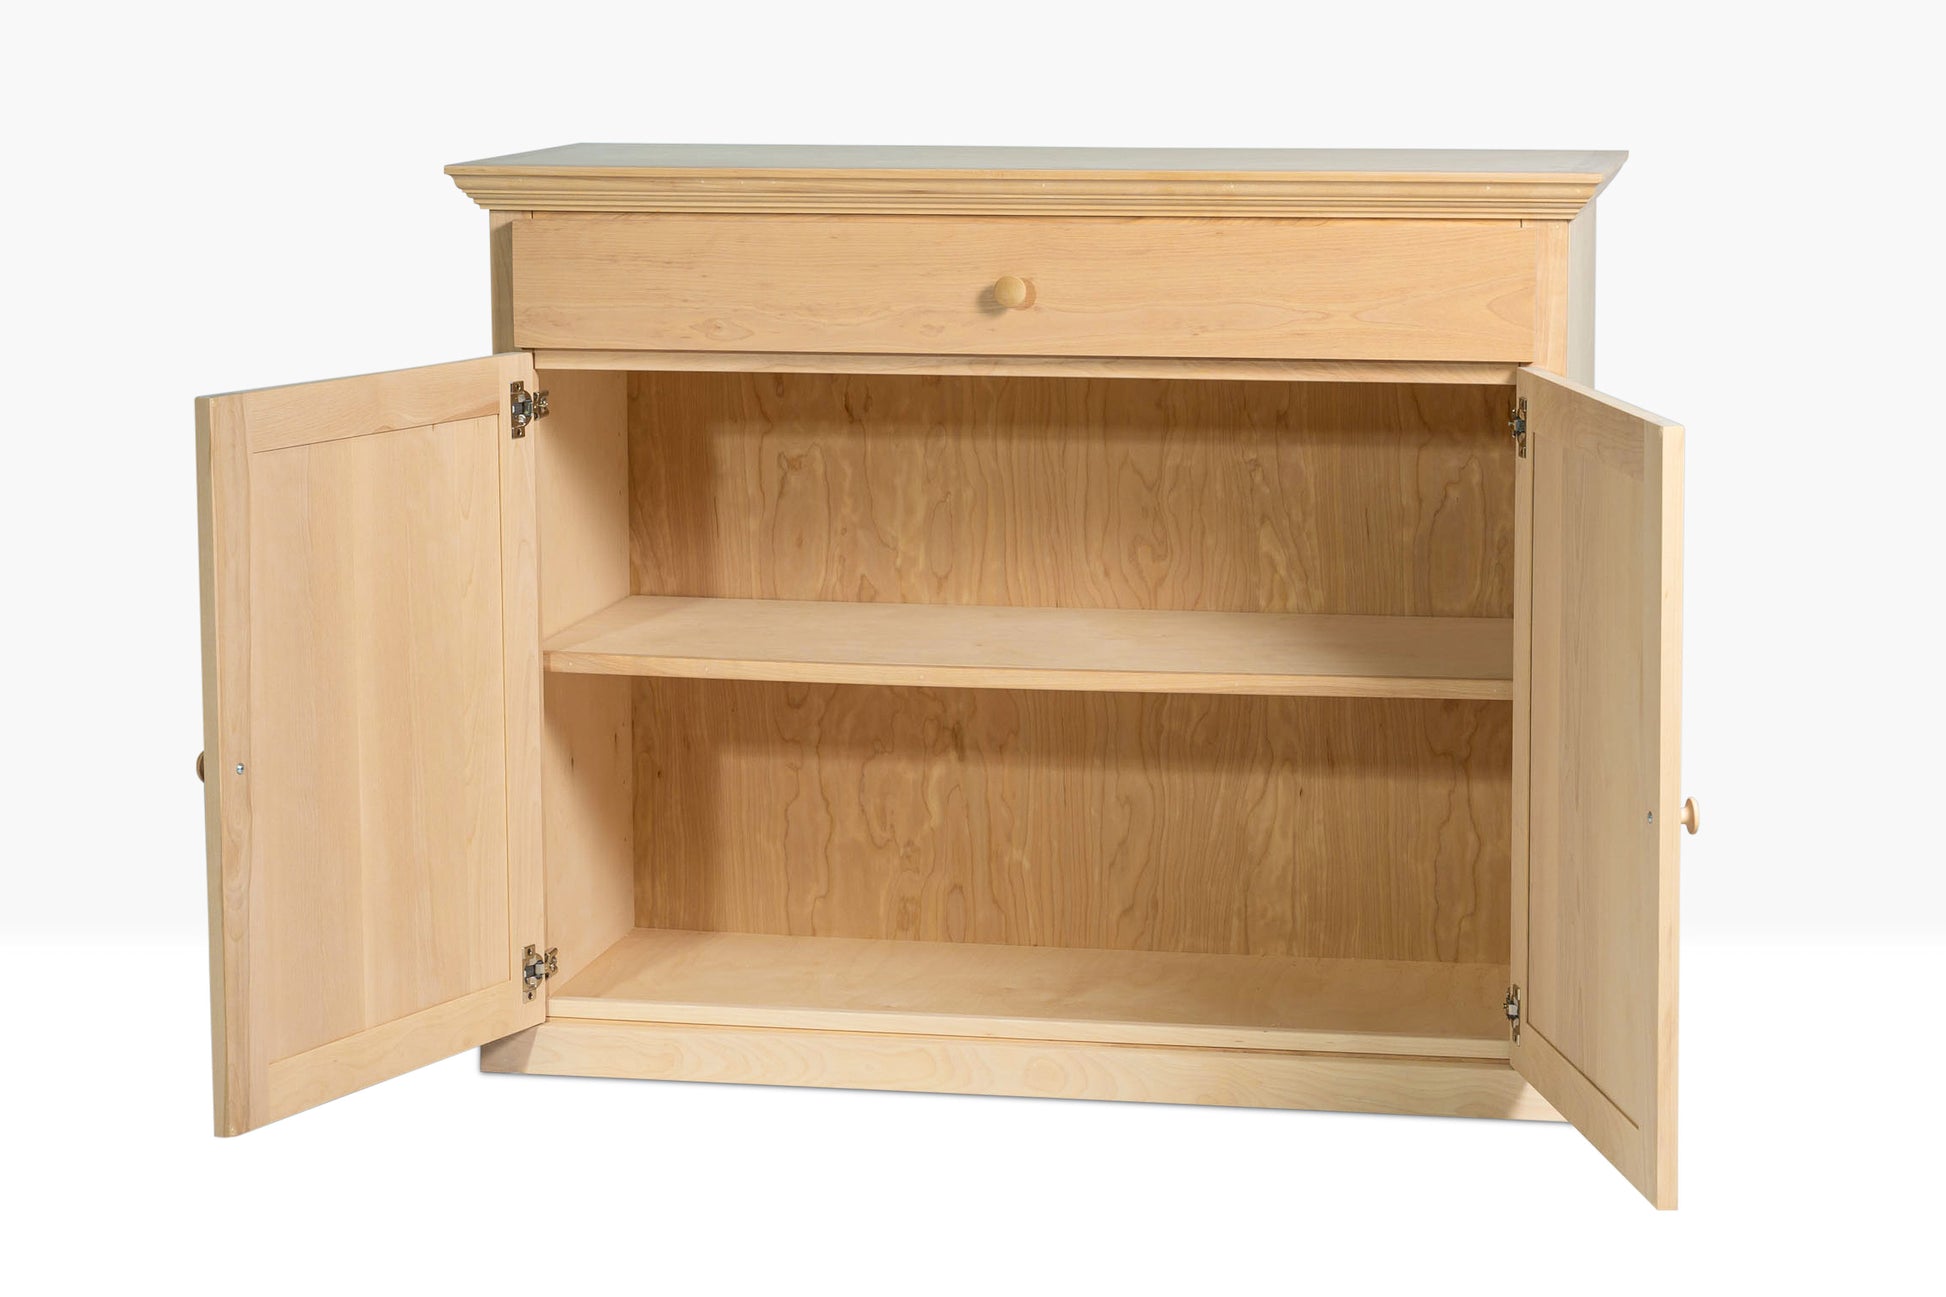 Berkshire Dover Cabinet with Drawer, twelve inches depth, with birch construction, shown unfinished and open to show shelving.